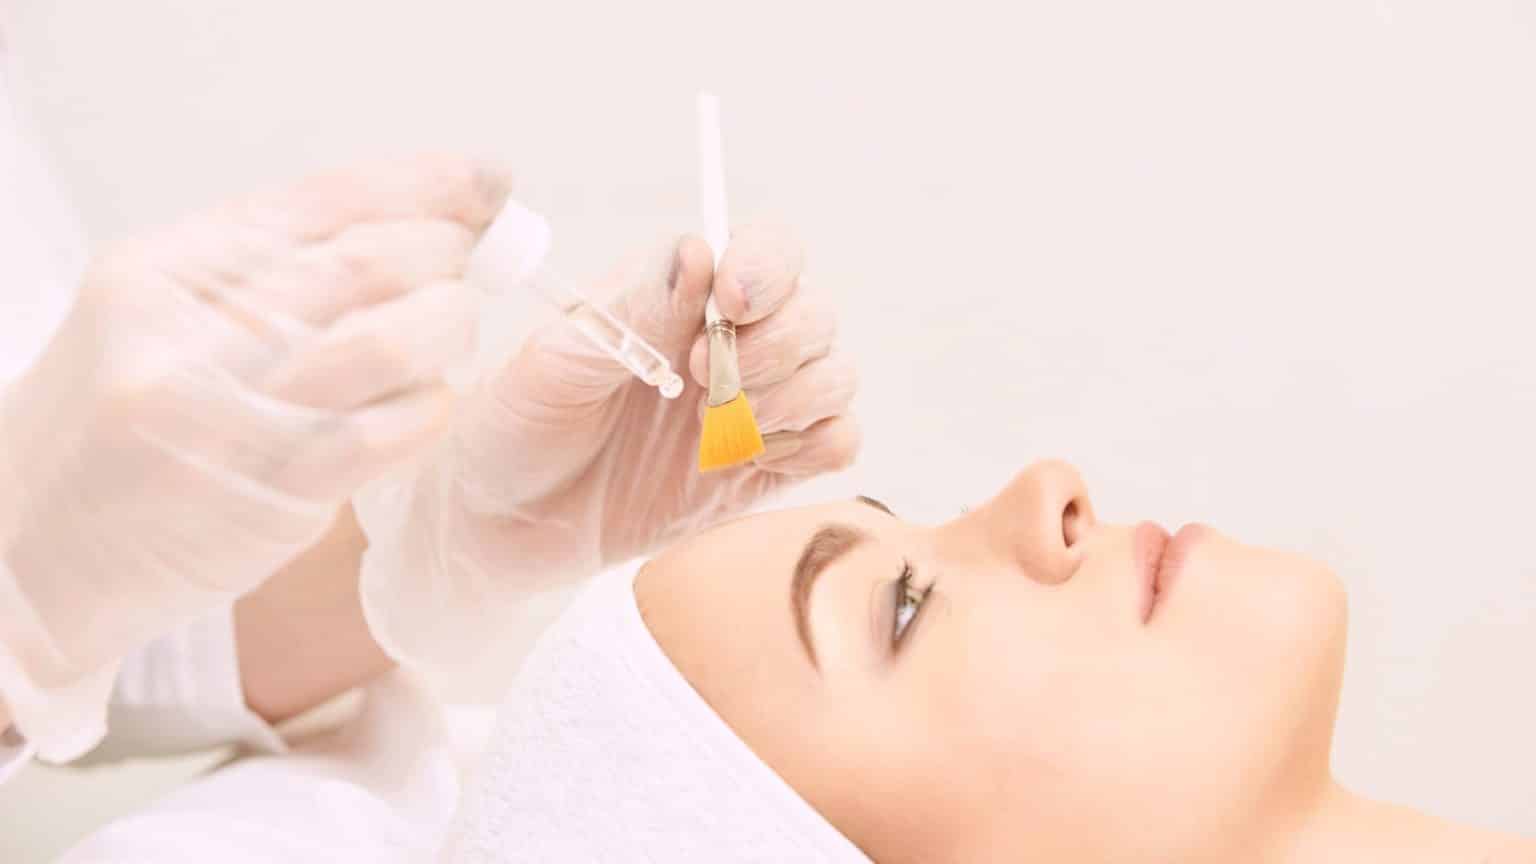 Which is better, chemical peeling or laser treatment